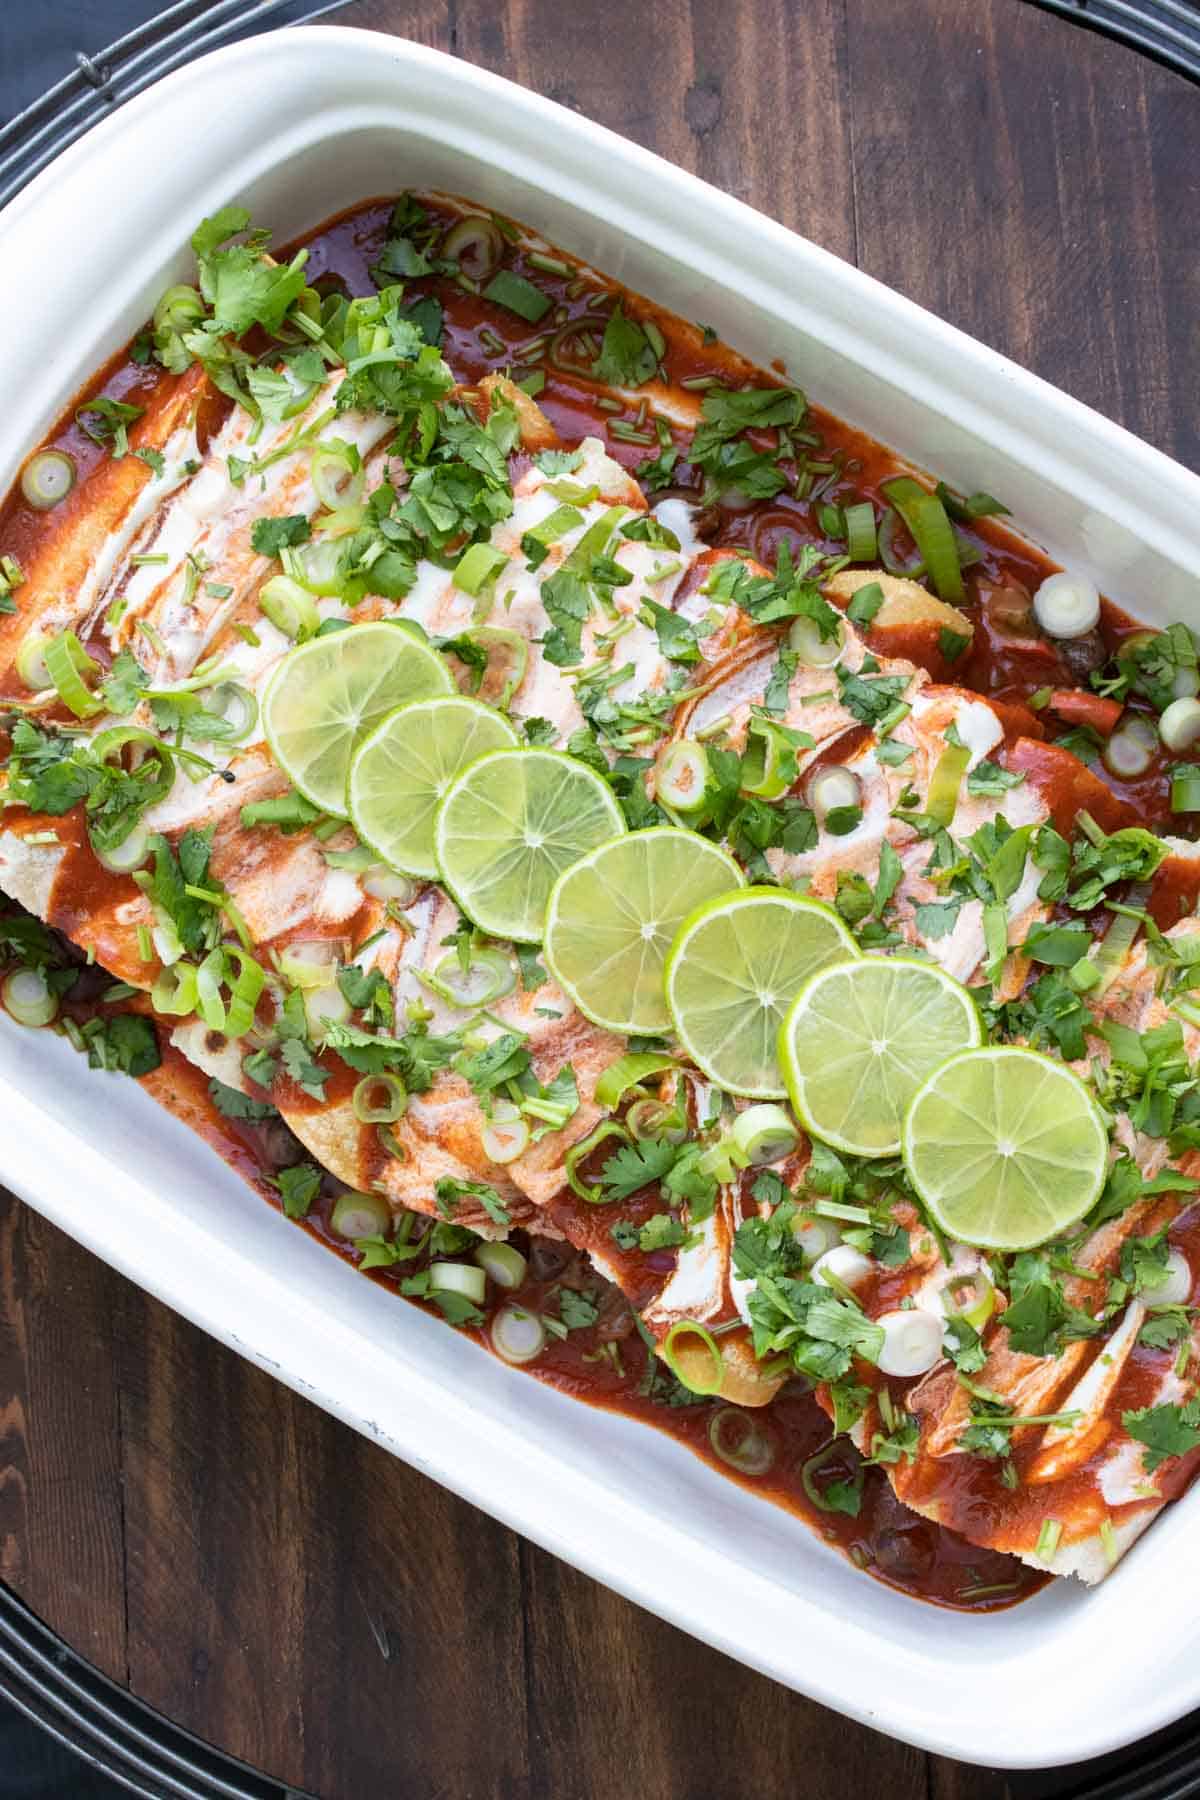 Uncooked enchiladas with red and white sauce, green onions and sliced limes